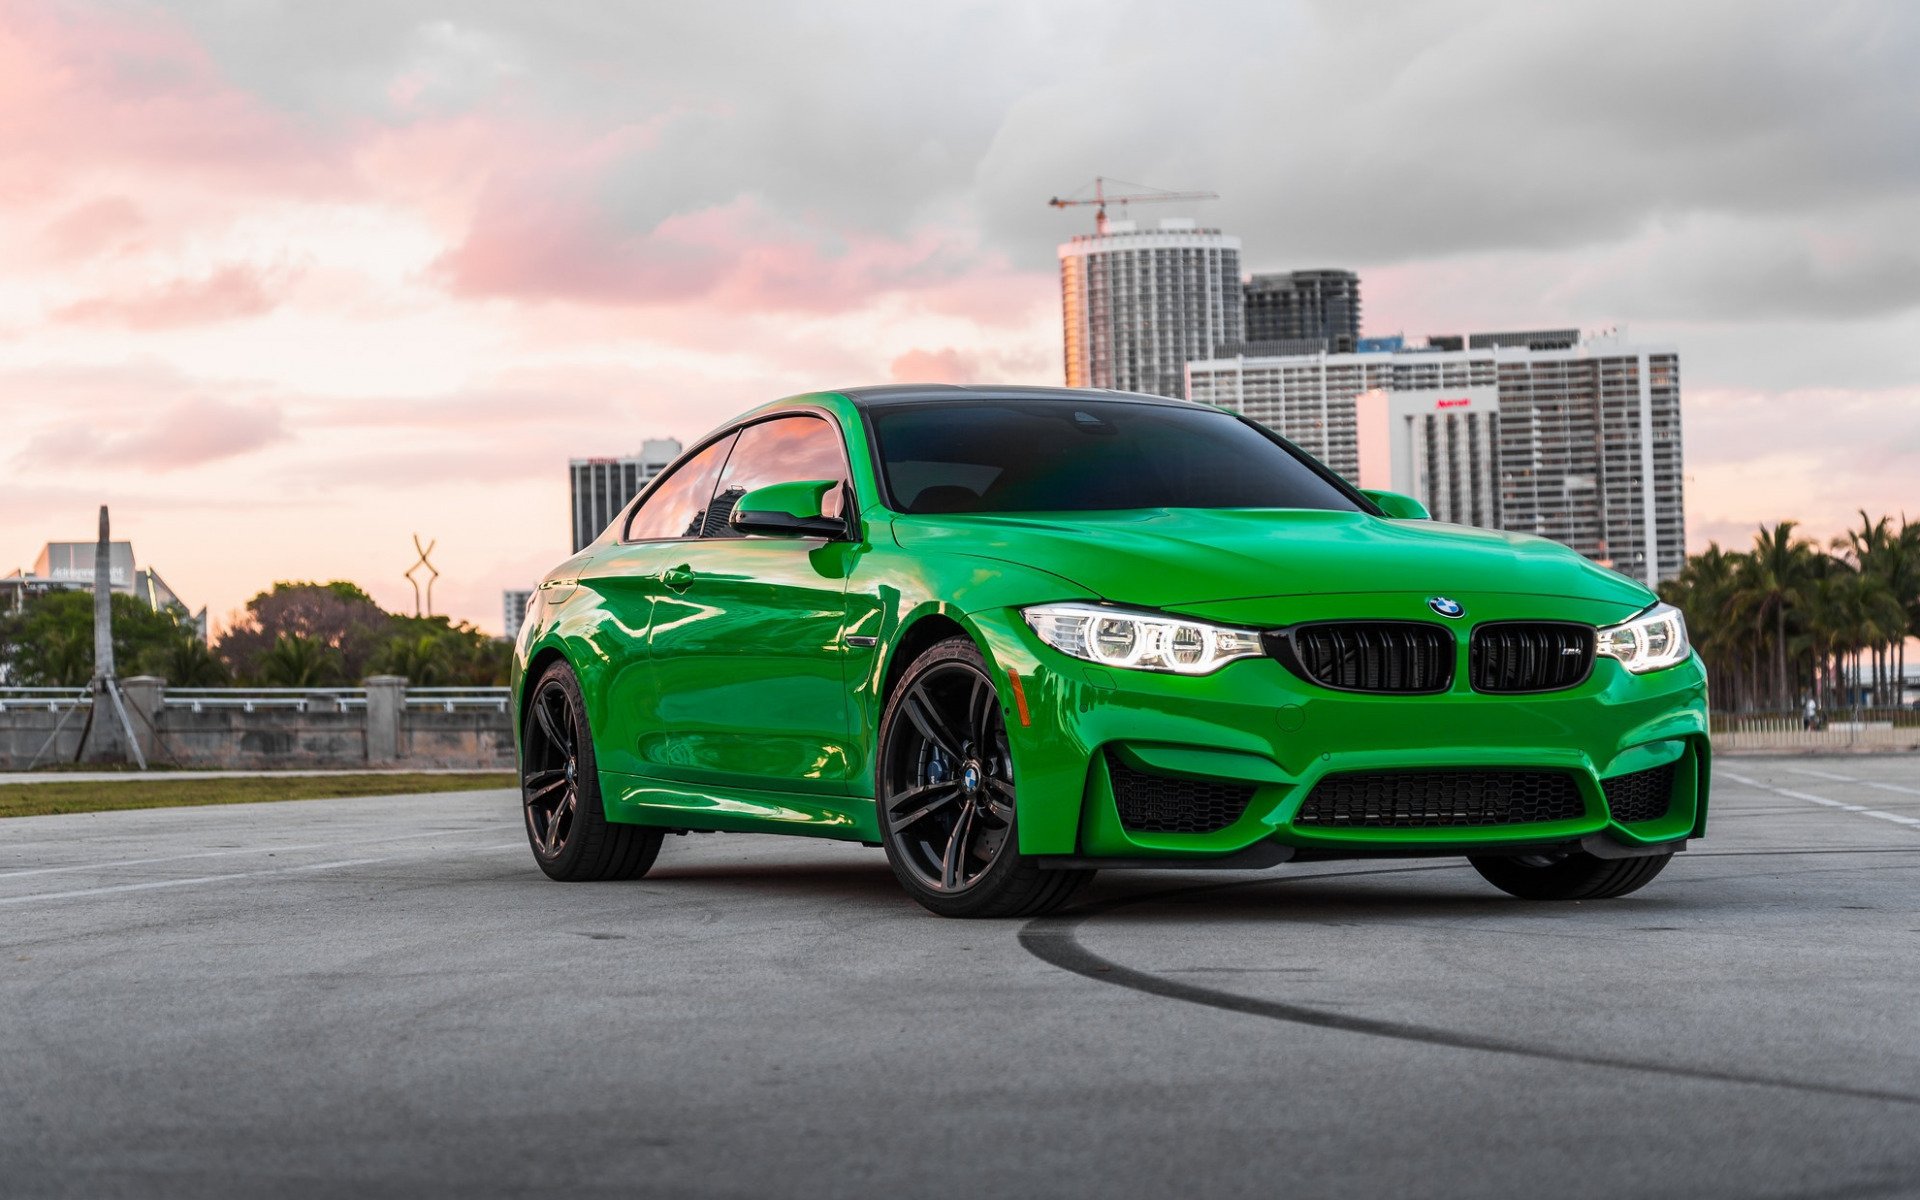 Download wallpaper BMW M F exterior, green sports coupe, M4 tuning, black wheels, green M German cars, BMW for desktop with resolution 1920x1200. High Quality HD picture wallpaper